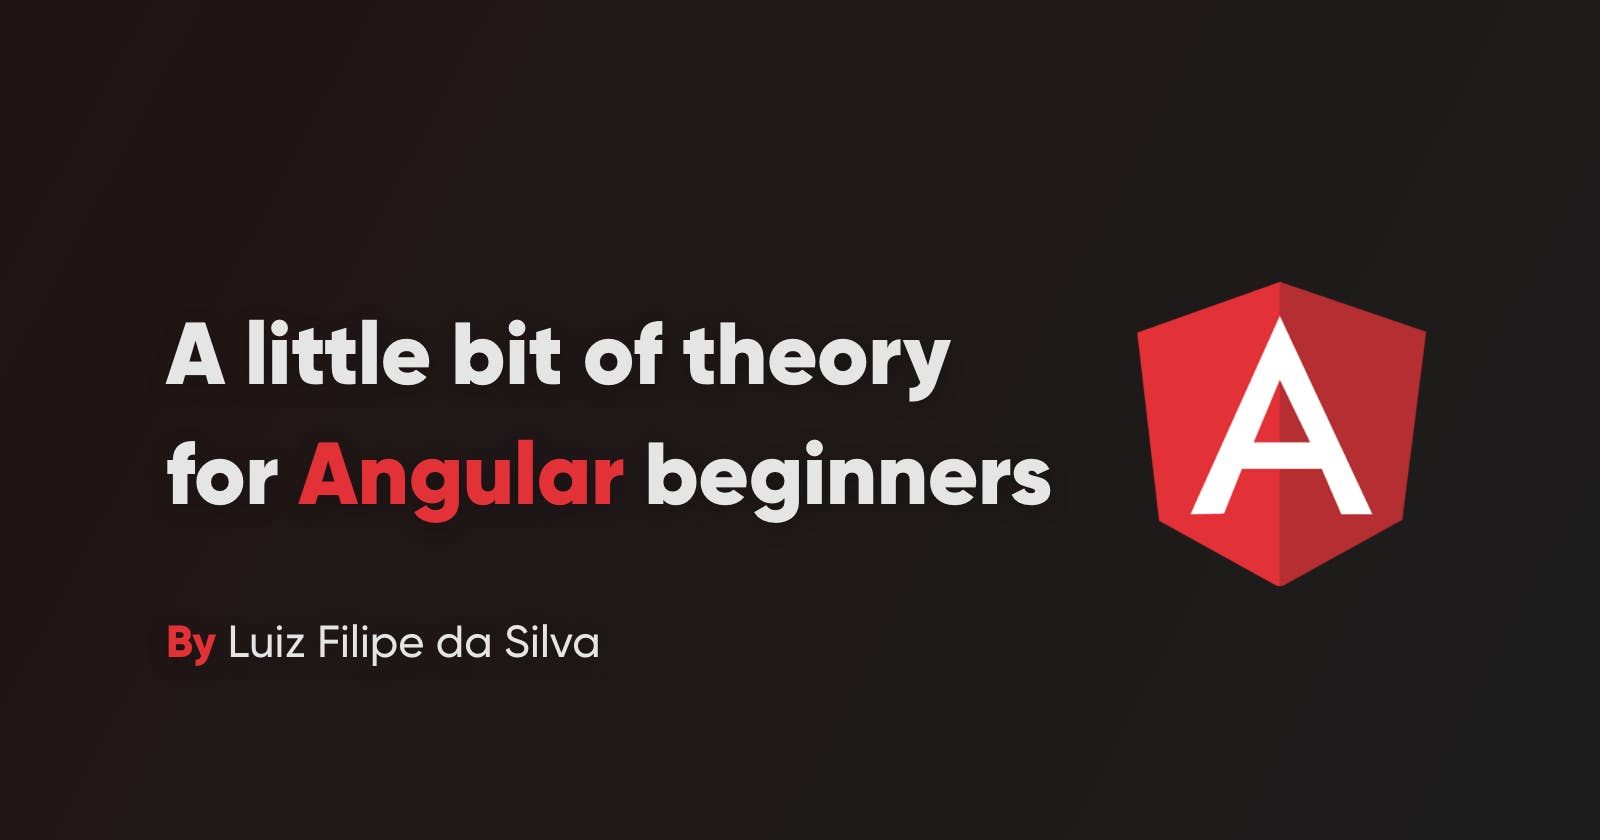 A little bit of theory for Angular beginners